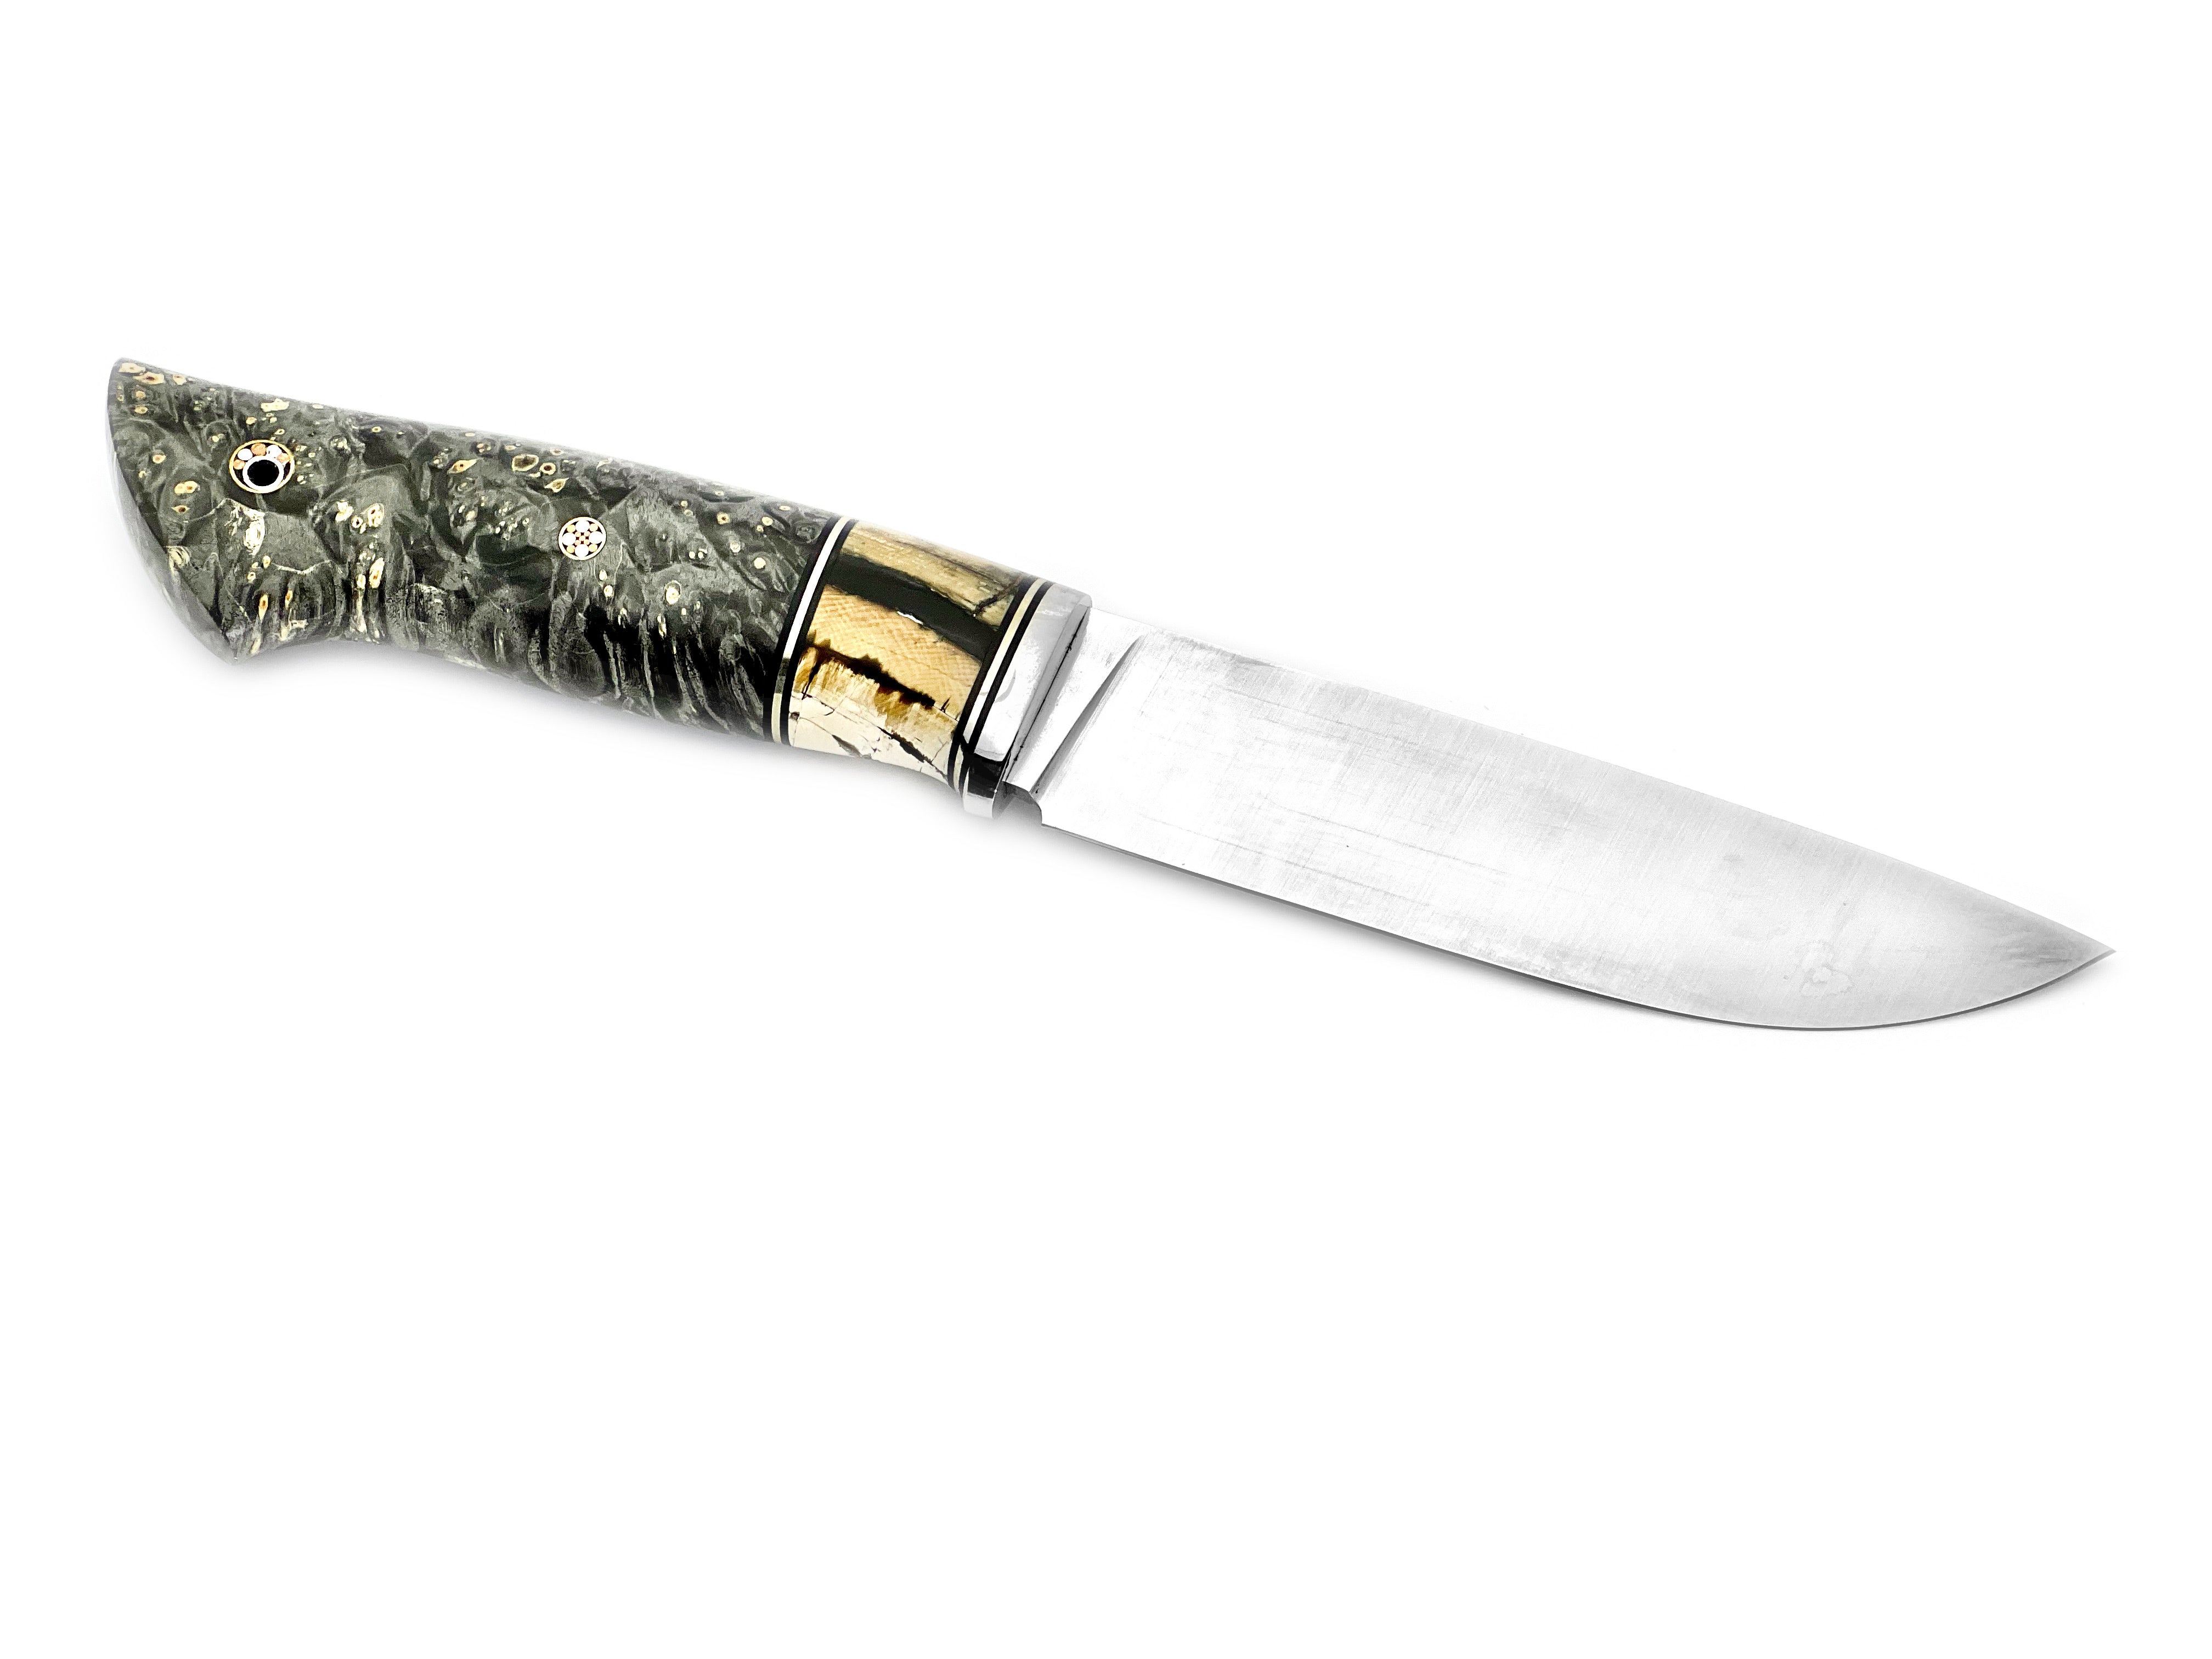 M390 Steel Hunting Knife with Mammoth Tooth